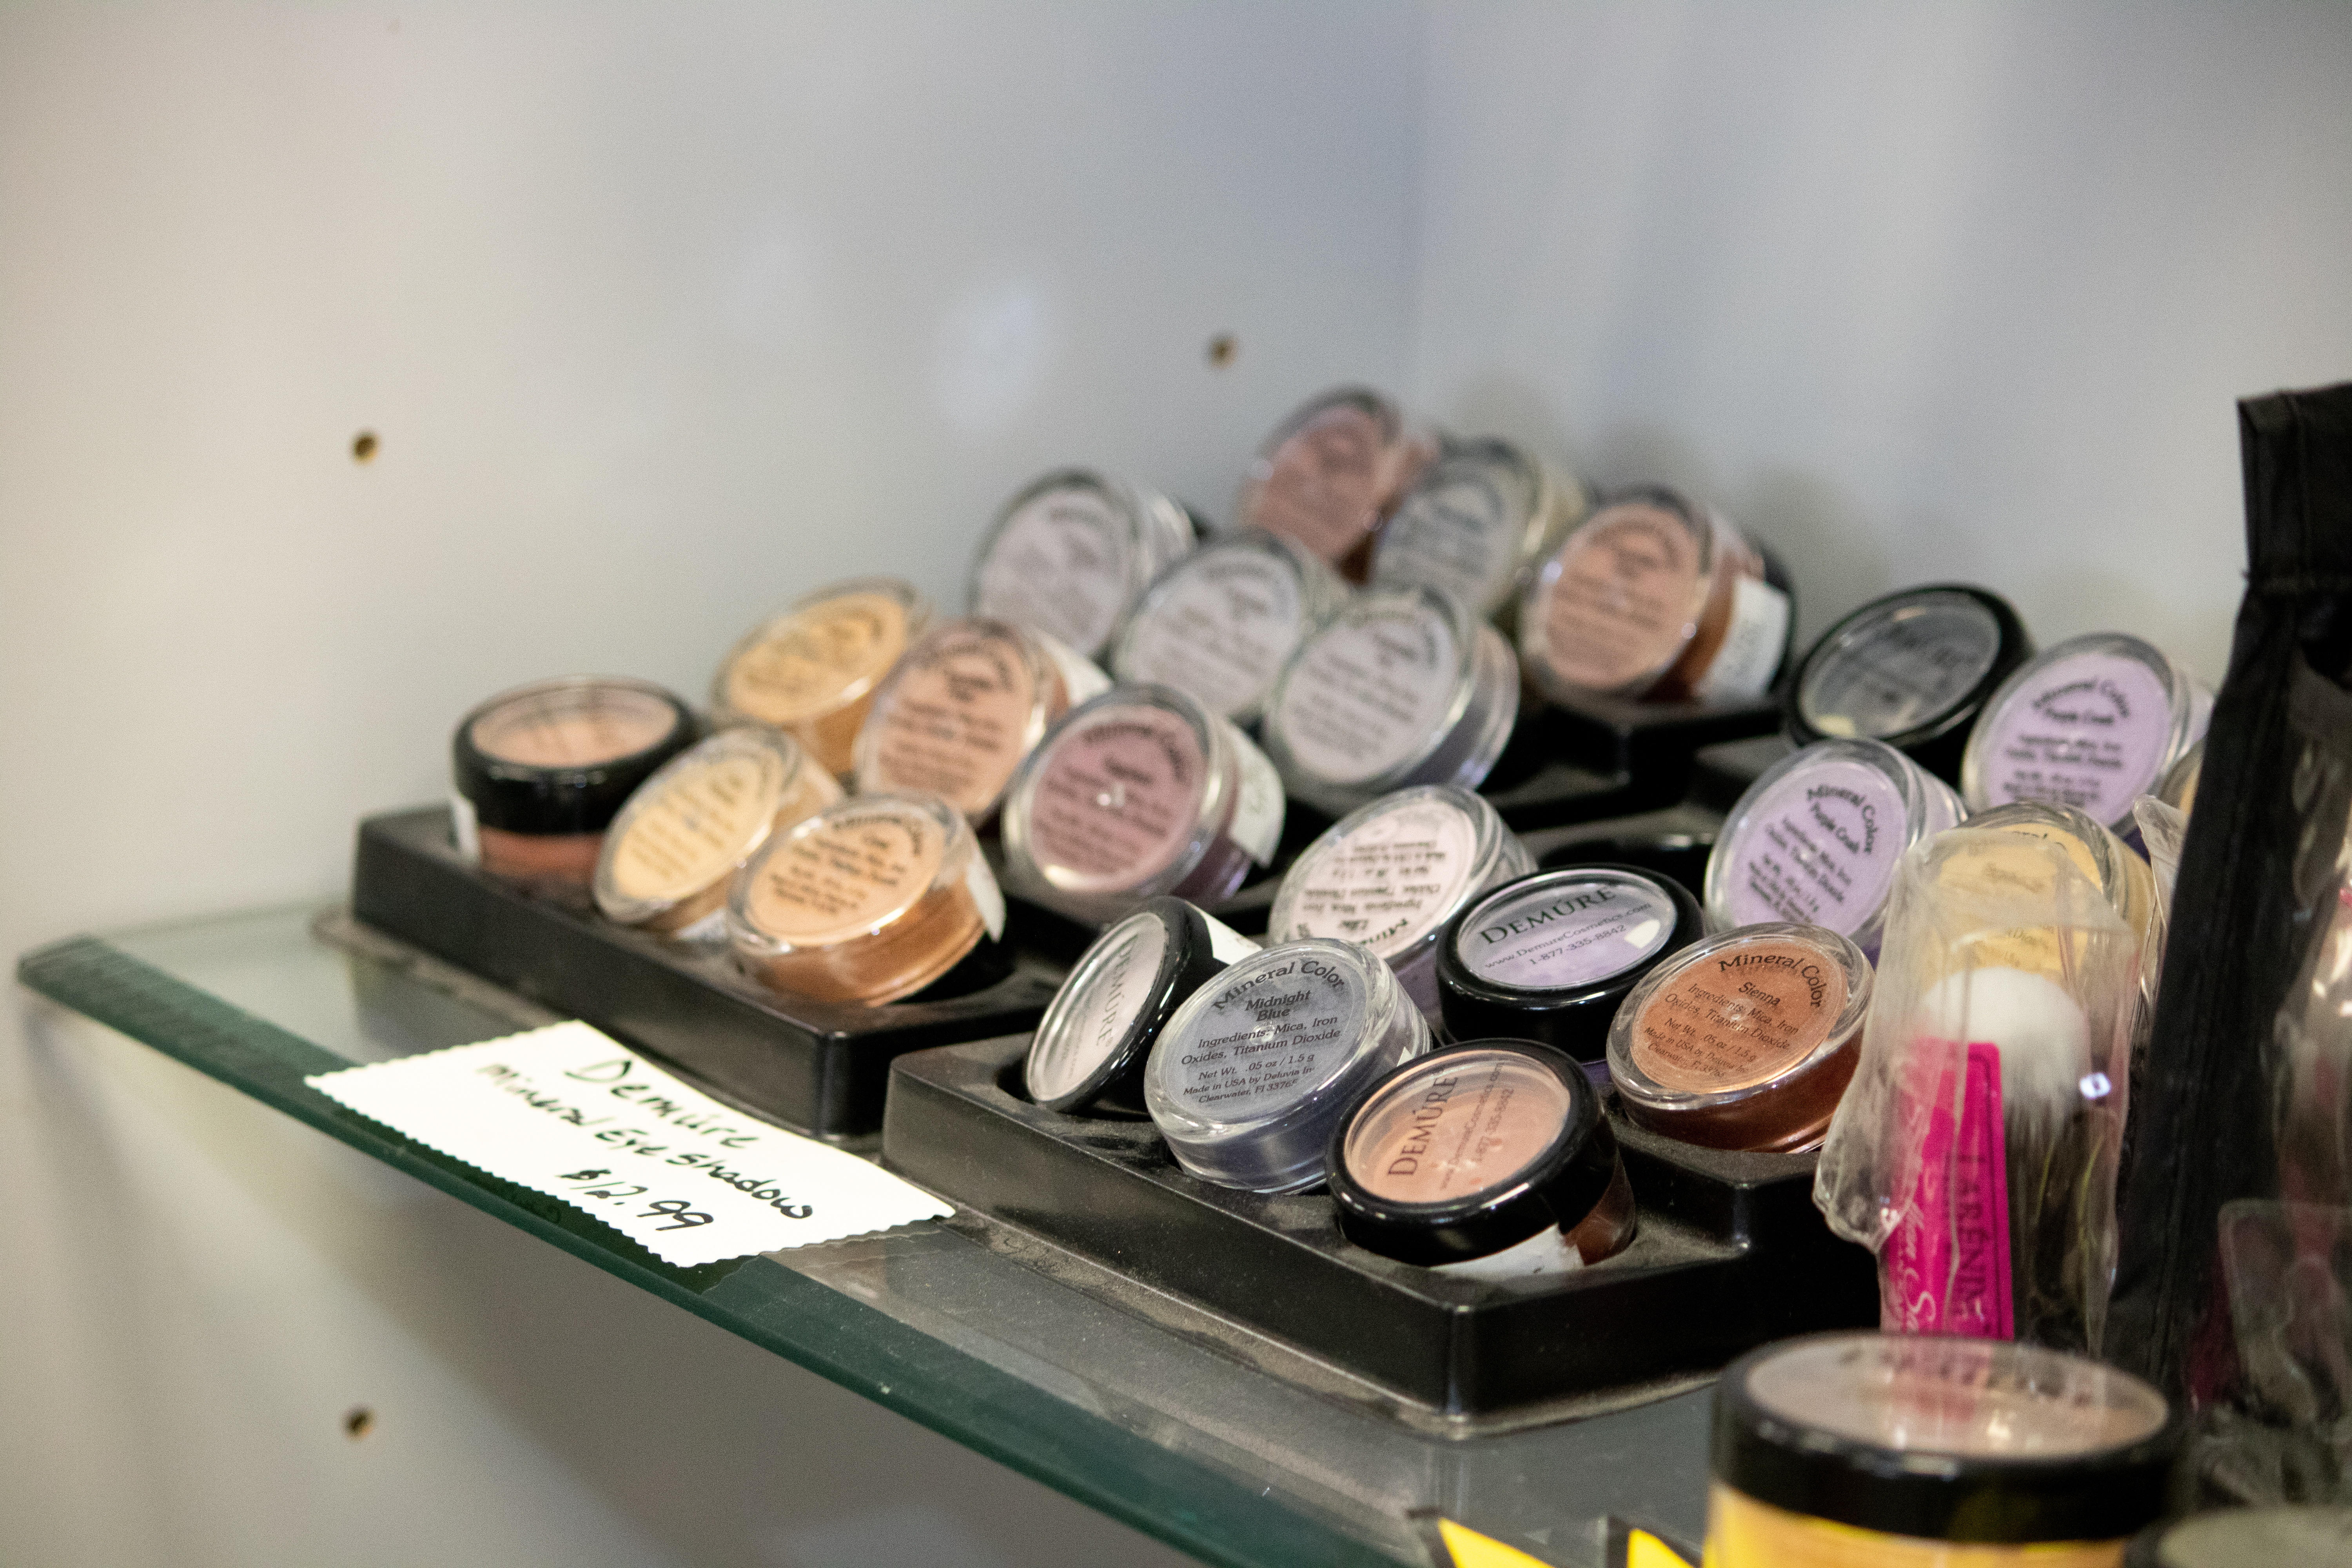 We bring great beauty products like pure mineral makeup to the  areas.